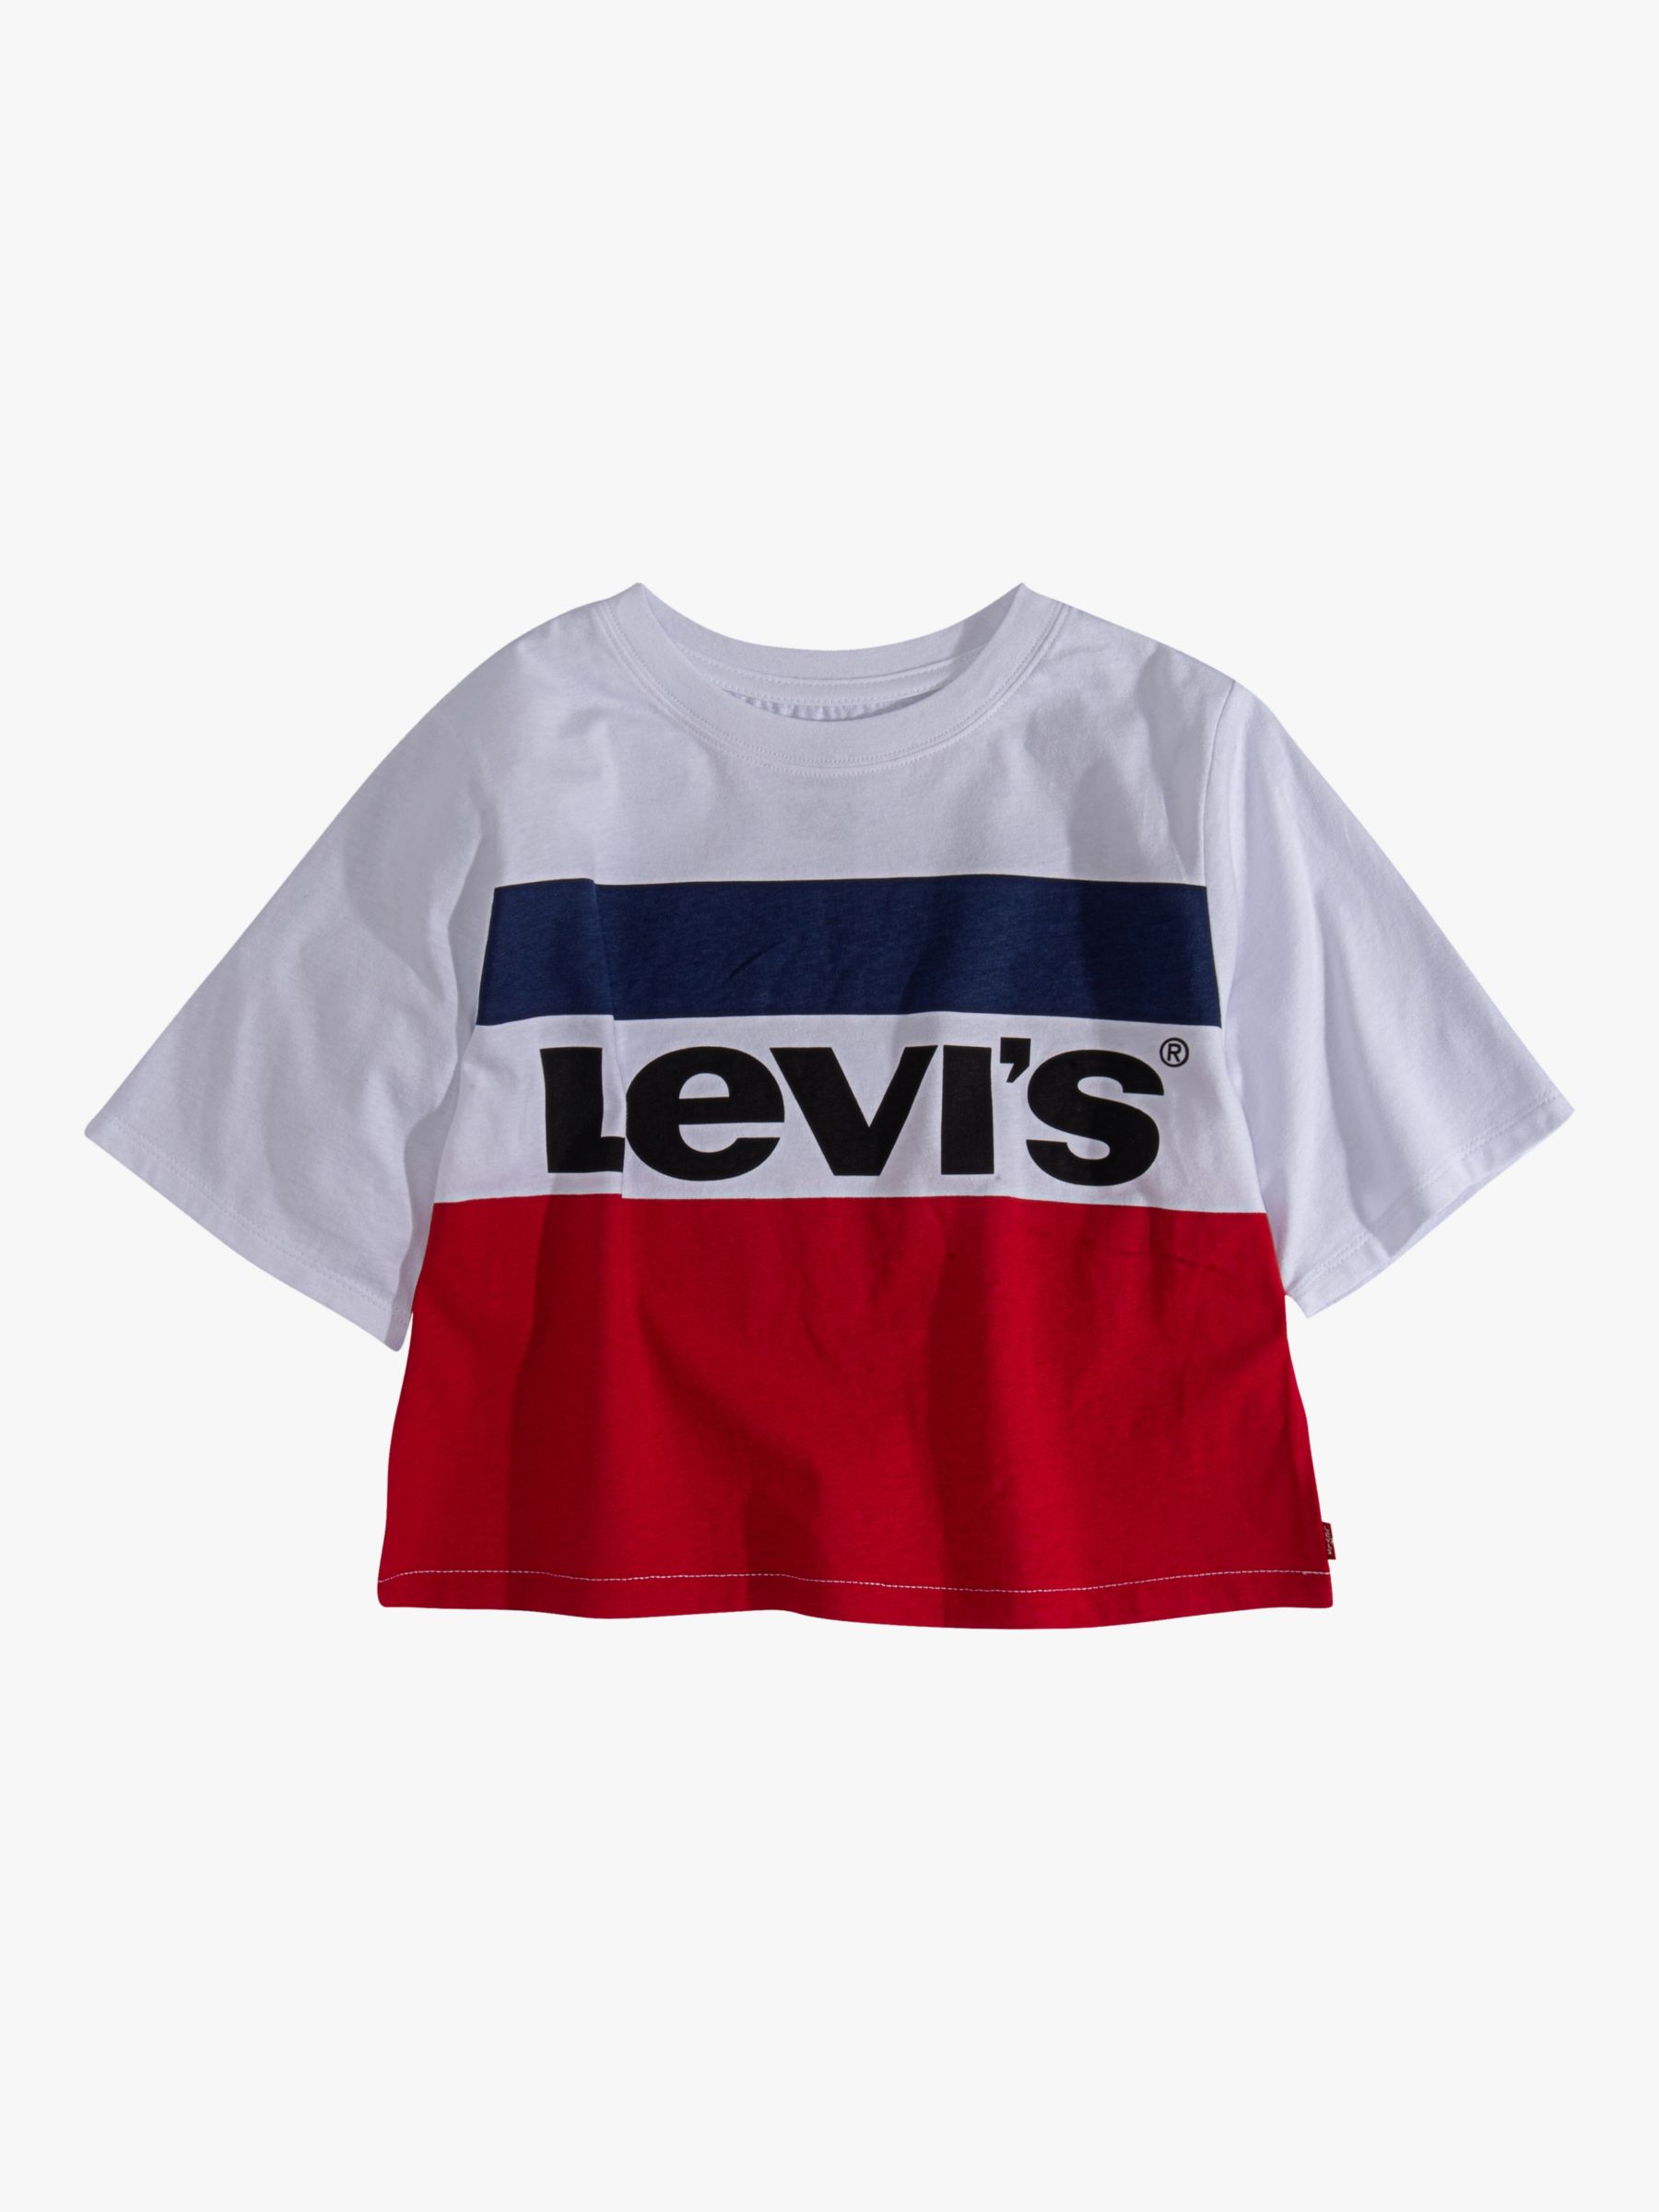 levis shirts for girls